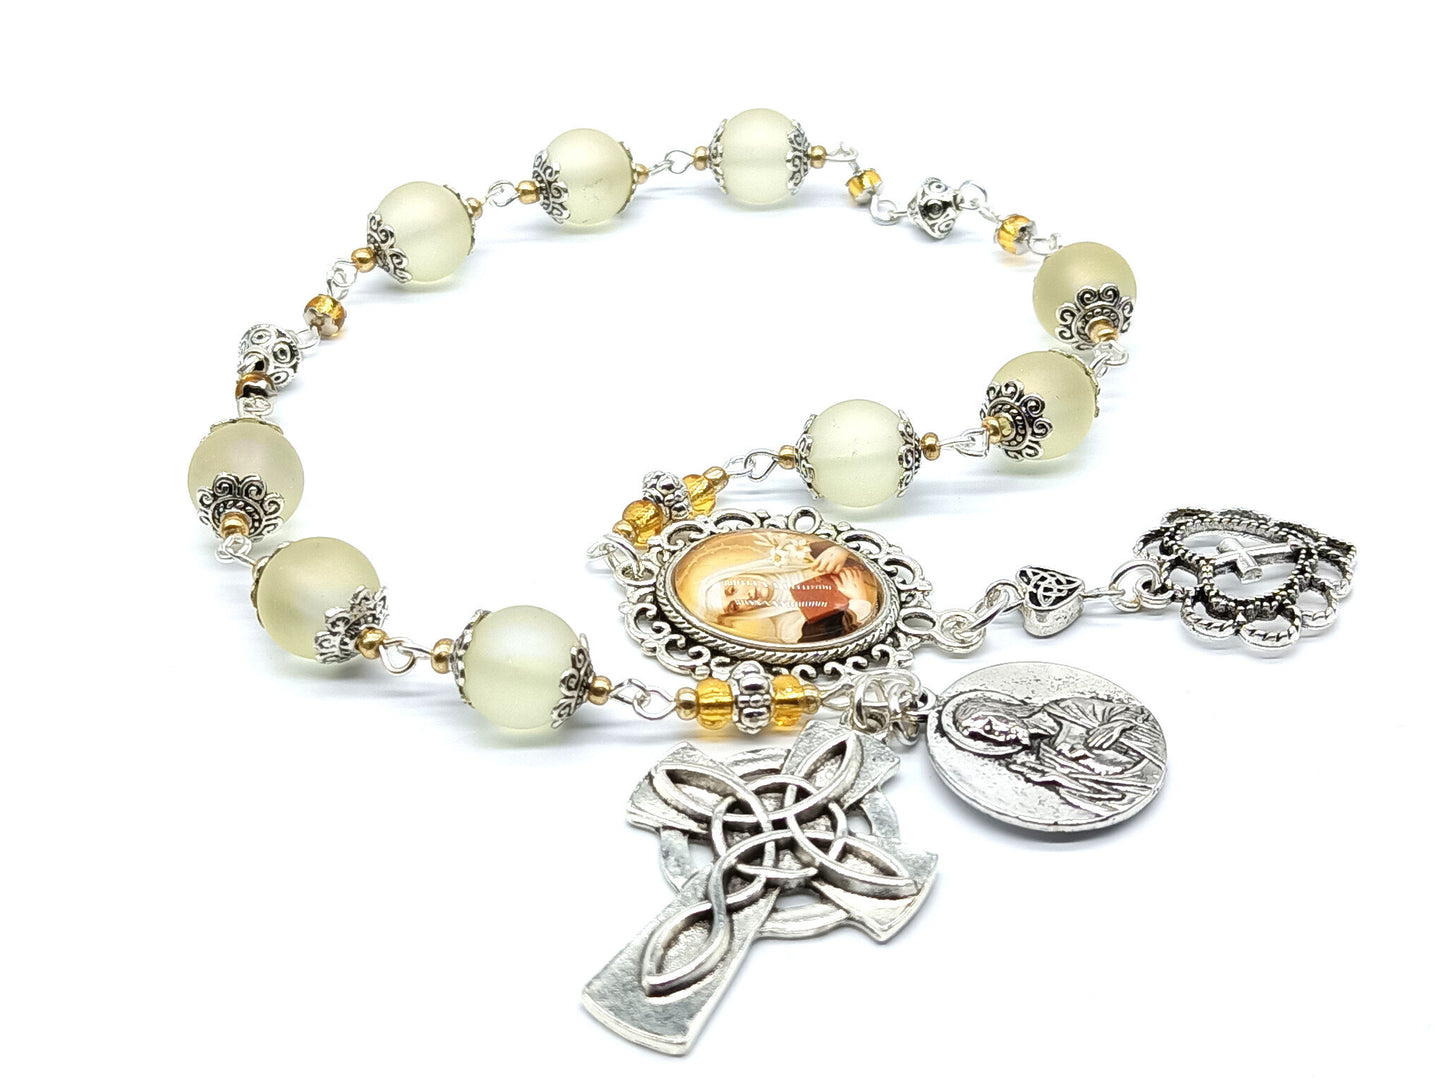 Saint Catherine of Siena unique rosary beads prayer chaplet with frosted glass beads, silver Celtic cross, picture centre medal and silver bead caps and accessories.